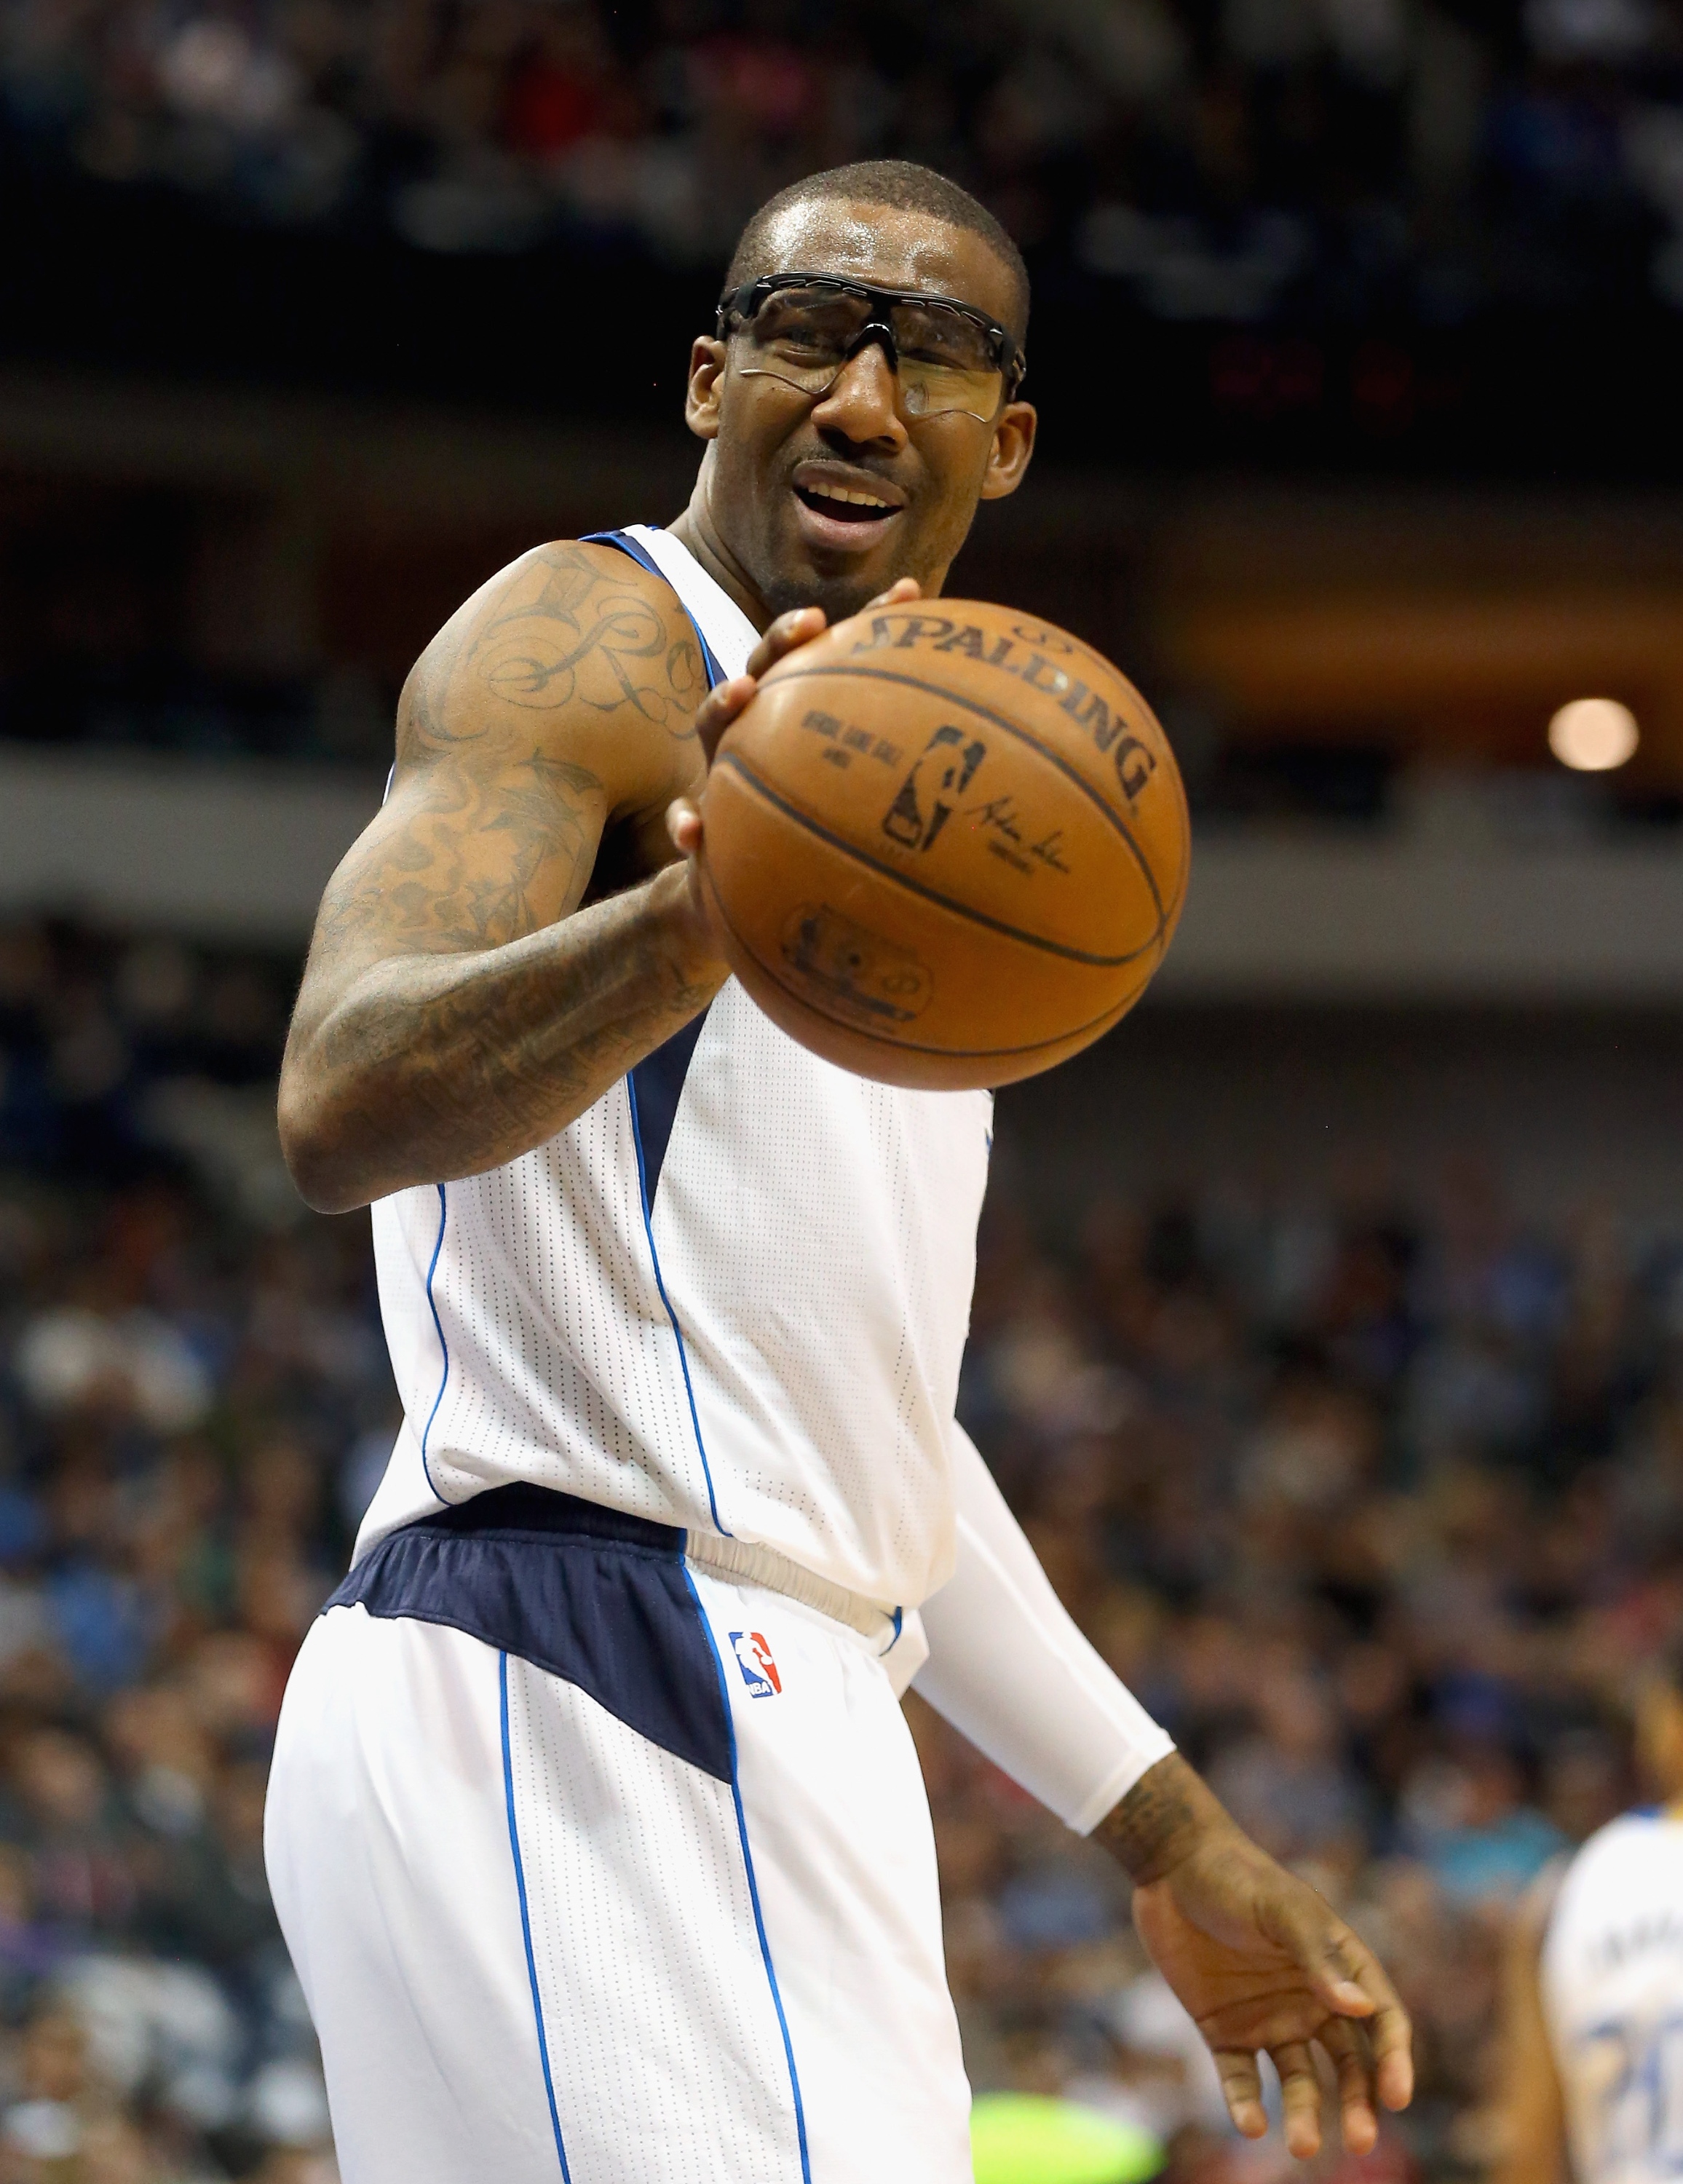 DALLAS, TX - FEBRUARY 24:  Amar'e Stoudemire #1 of the Dallas Mavericks reacts against the Toronto Raptors at American Airlines Center on February 24, 2015 in Dallas, Texas.  NOTE TO USER: User expressly acknowledges and agrees that, by downloading and or using this photograph, User is consenting to the terms and conditions of the Getty Images License Agreement.  (Photo by Ronald Martinez/Getty Images)